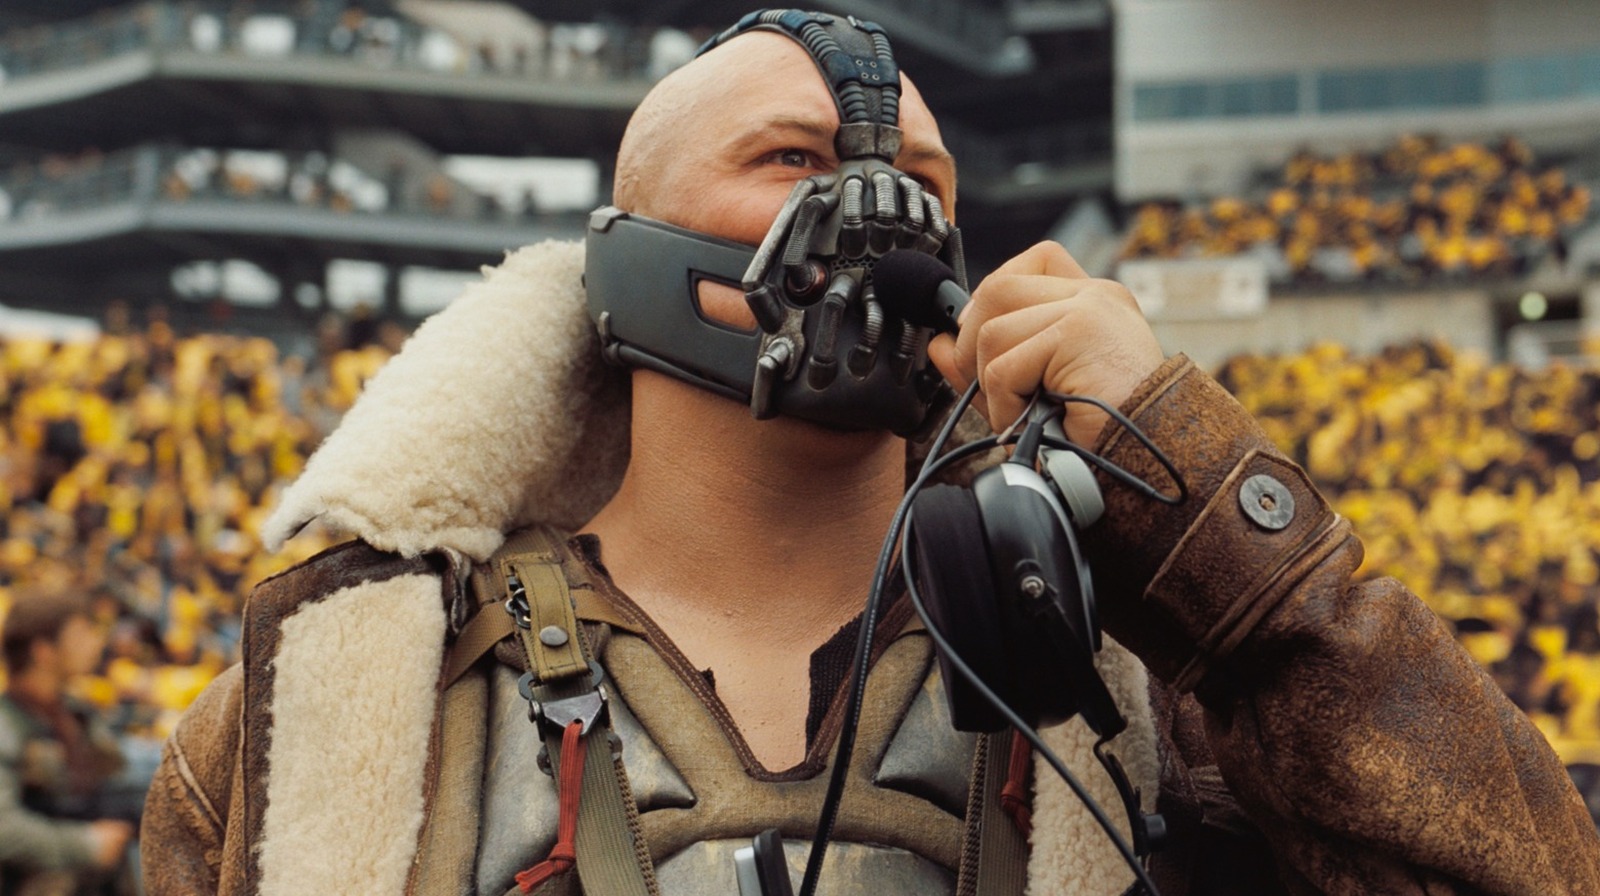 Shooting In IMAX For The Dark Knight Rises Meant Going Practical For Its Most Extreme Scenes